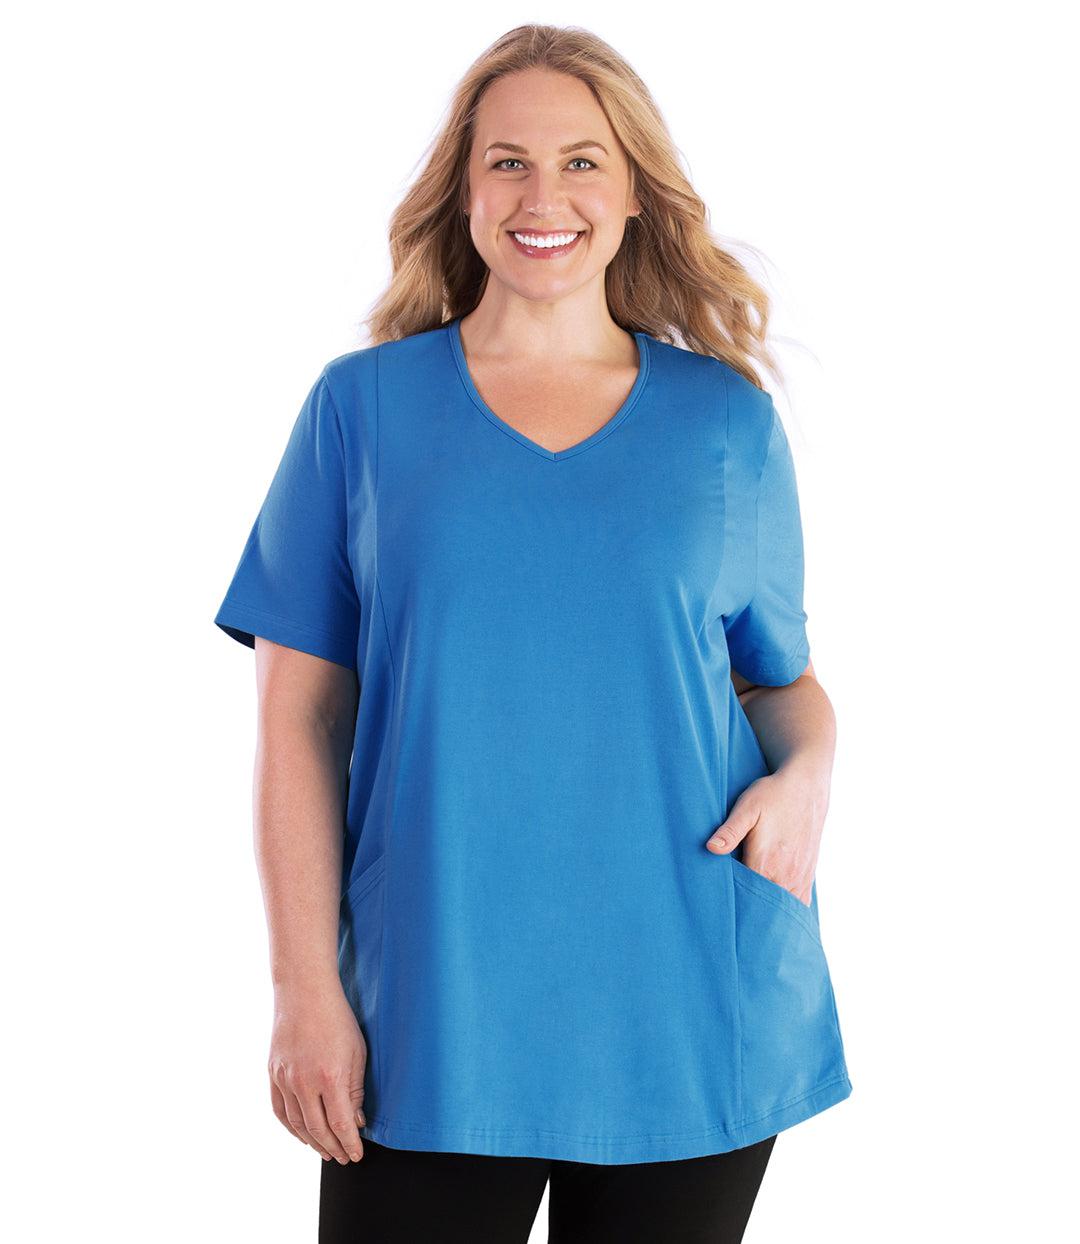 Plus size woman, facing front, wearing JunoActive plus size Stretch Naturals Lite Pocketed V-Neck Short Sleeve Top in the color Dutch Blue. Her left hand is in the shirt pocket by her hip, her right arm is naturally at her side. She is wearing JunoActive Plus Size Leggings in the color Black.